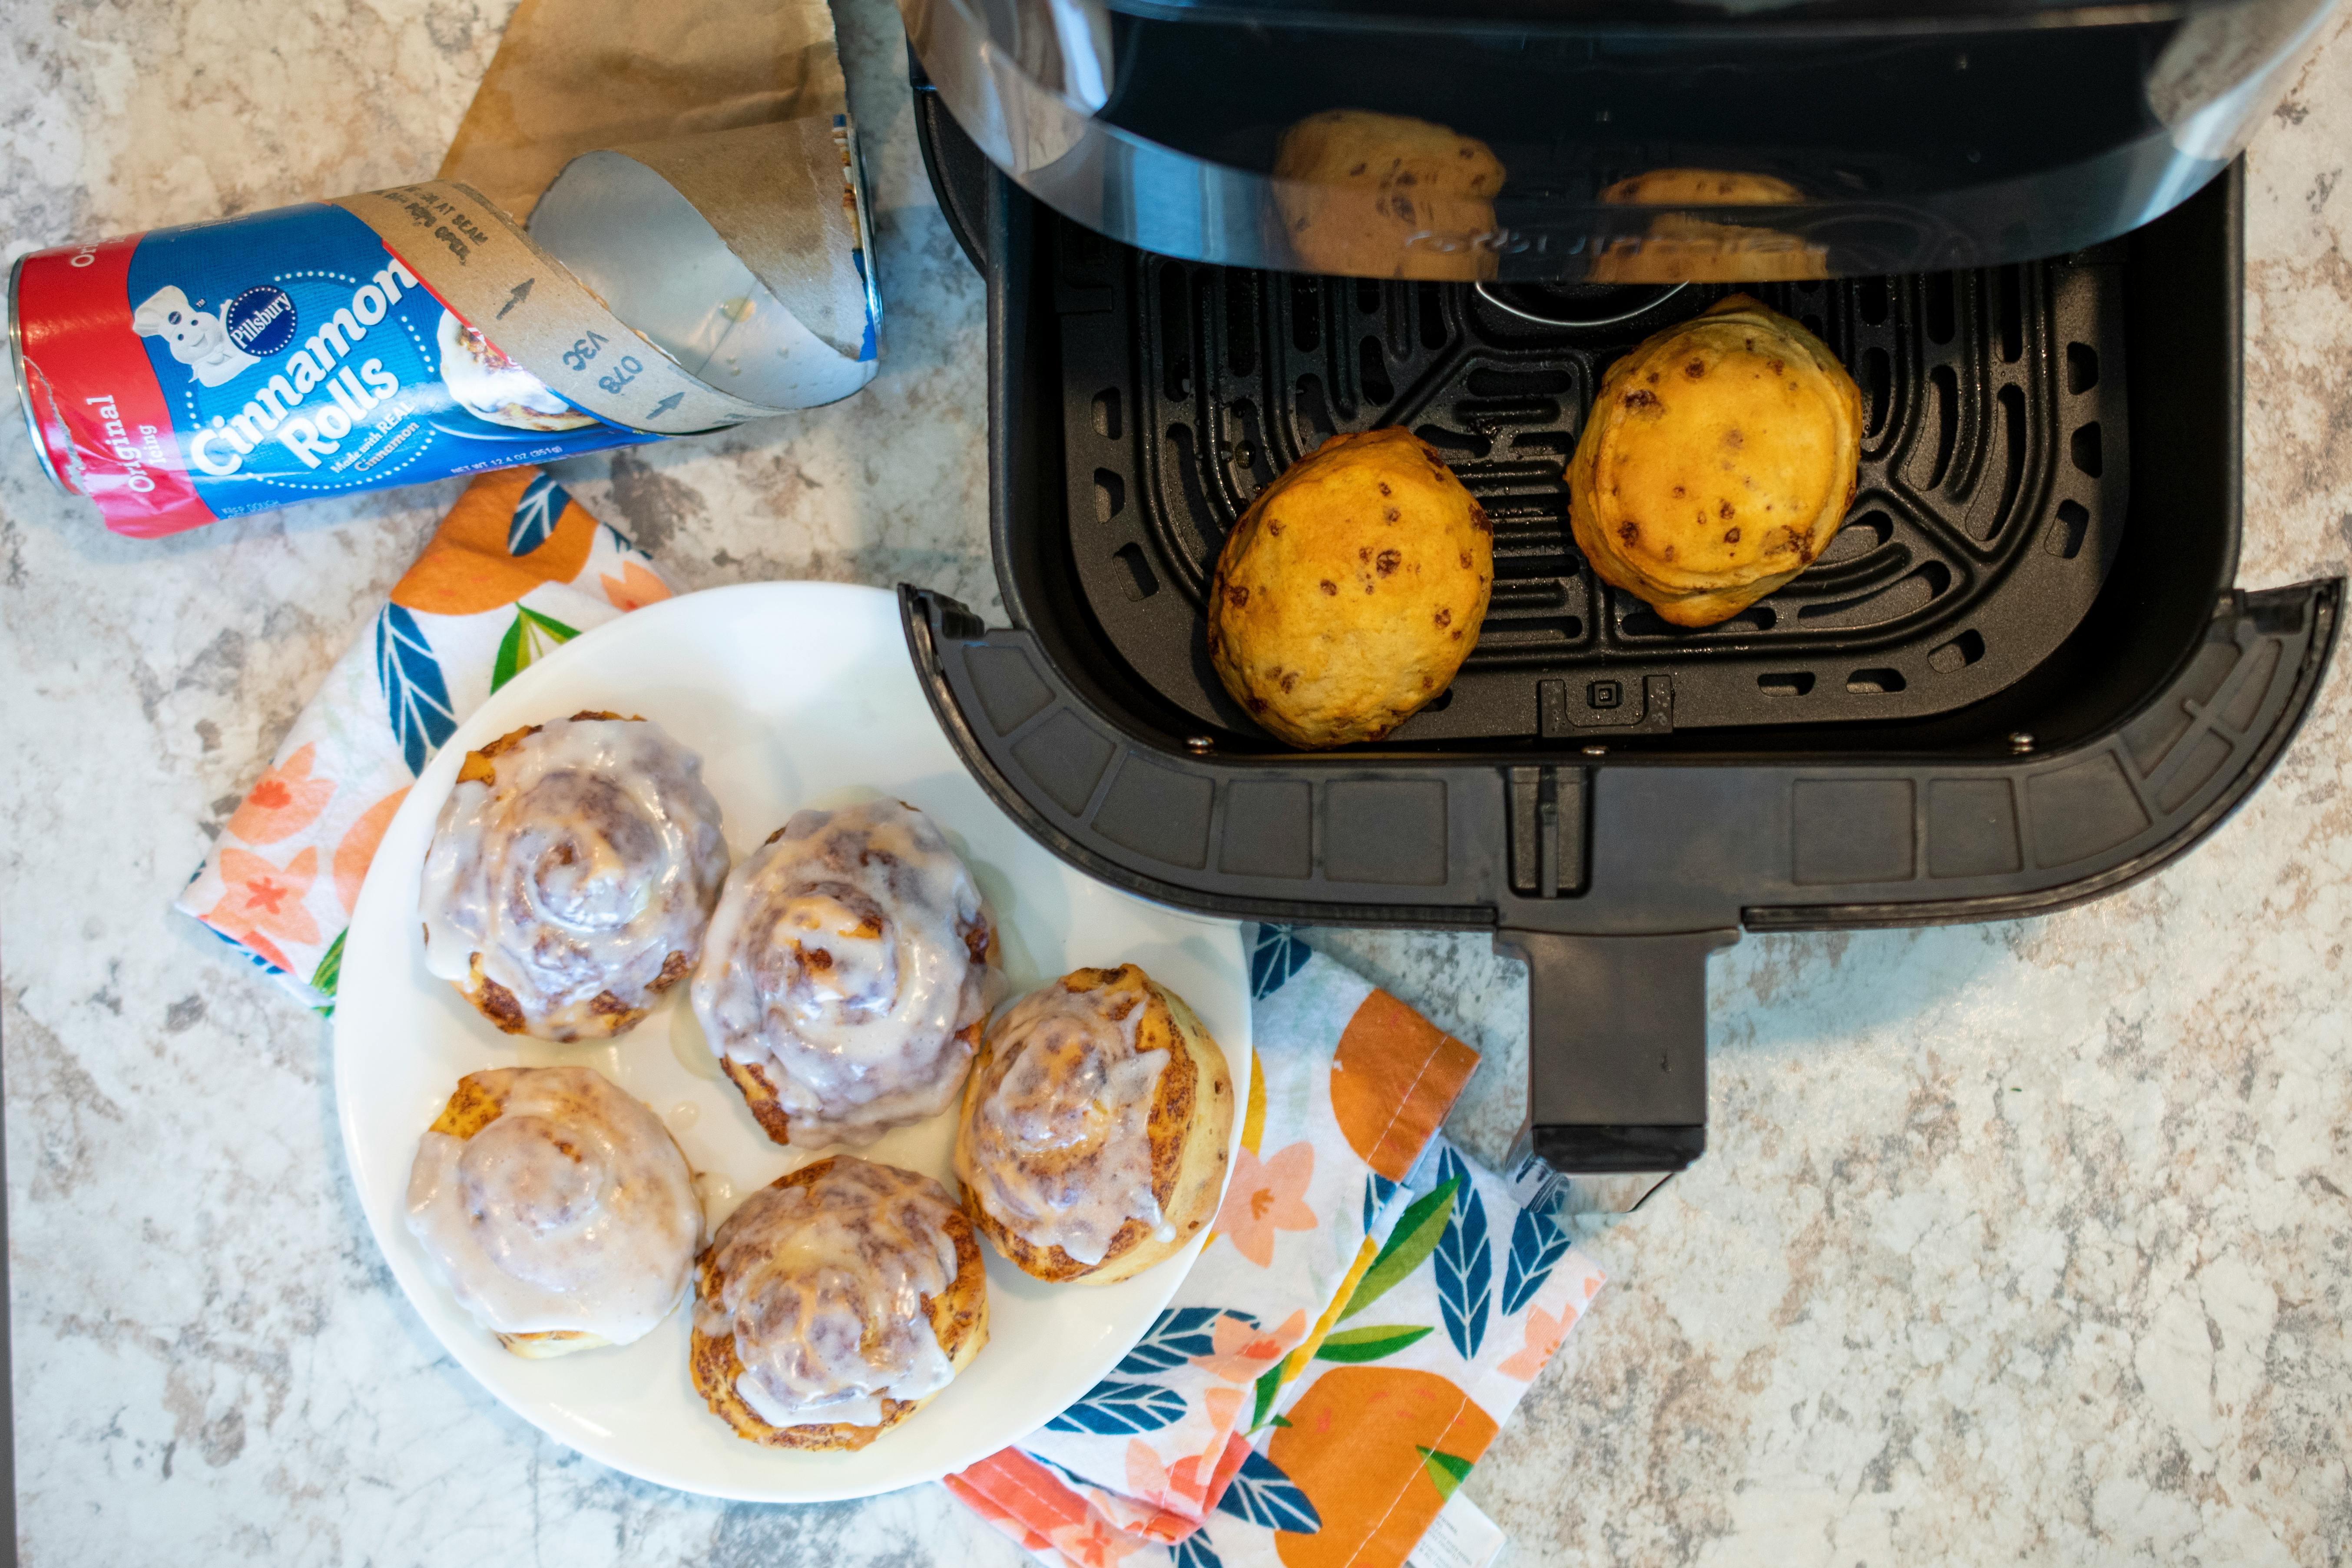 Air Fryer Back to School Recipes - Recipes From A Pantry